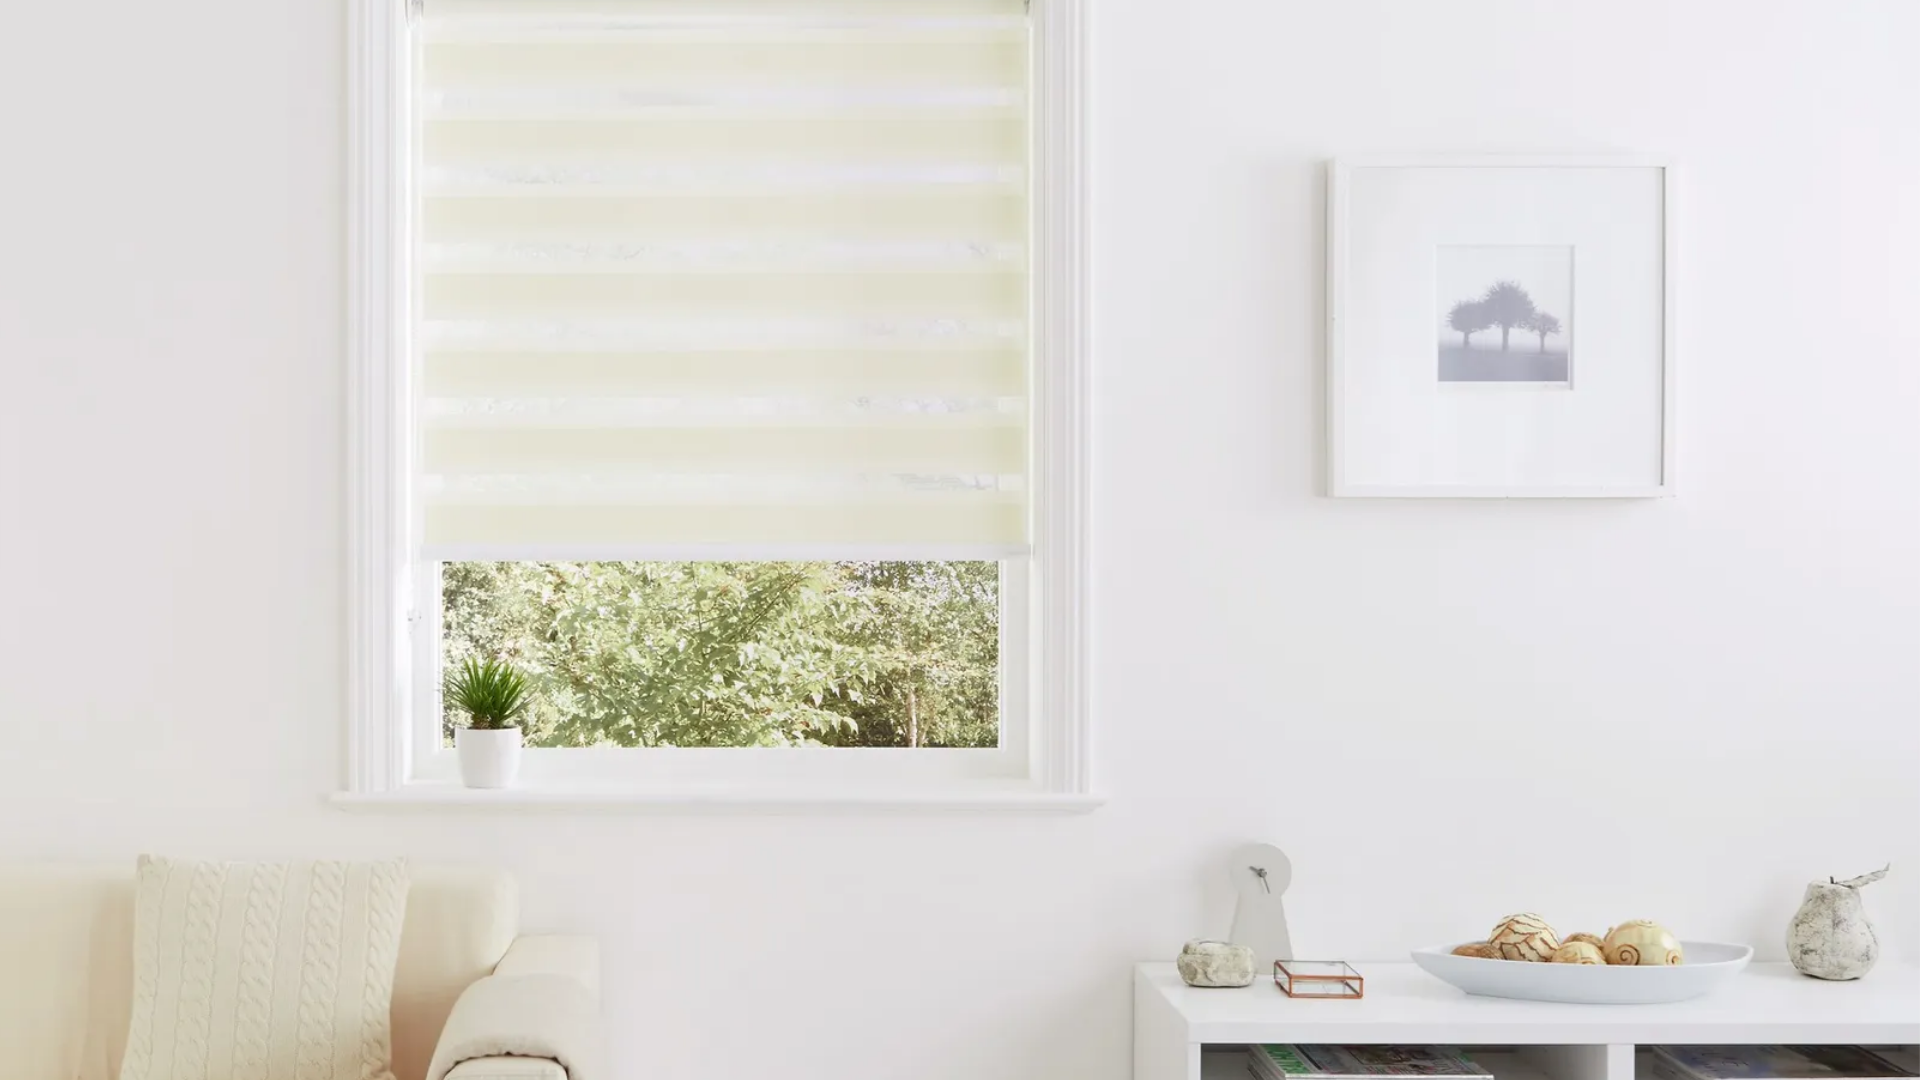 Automated Blinds